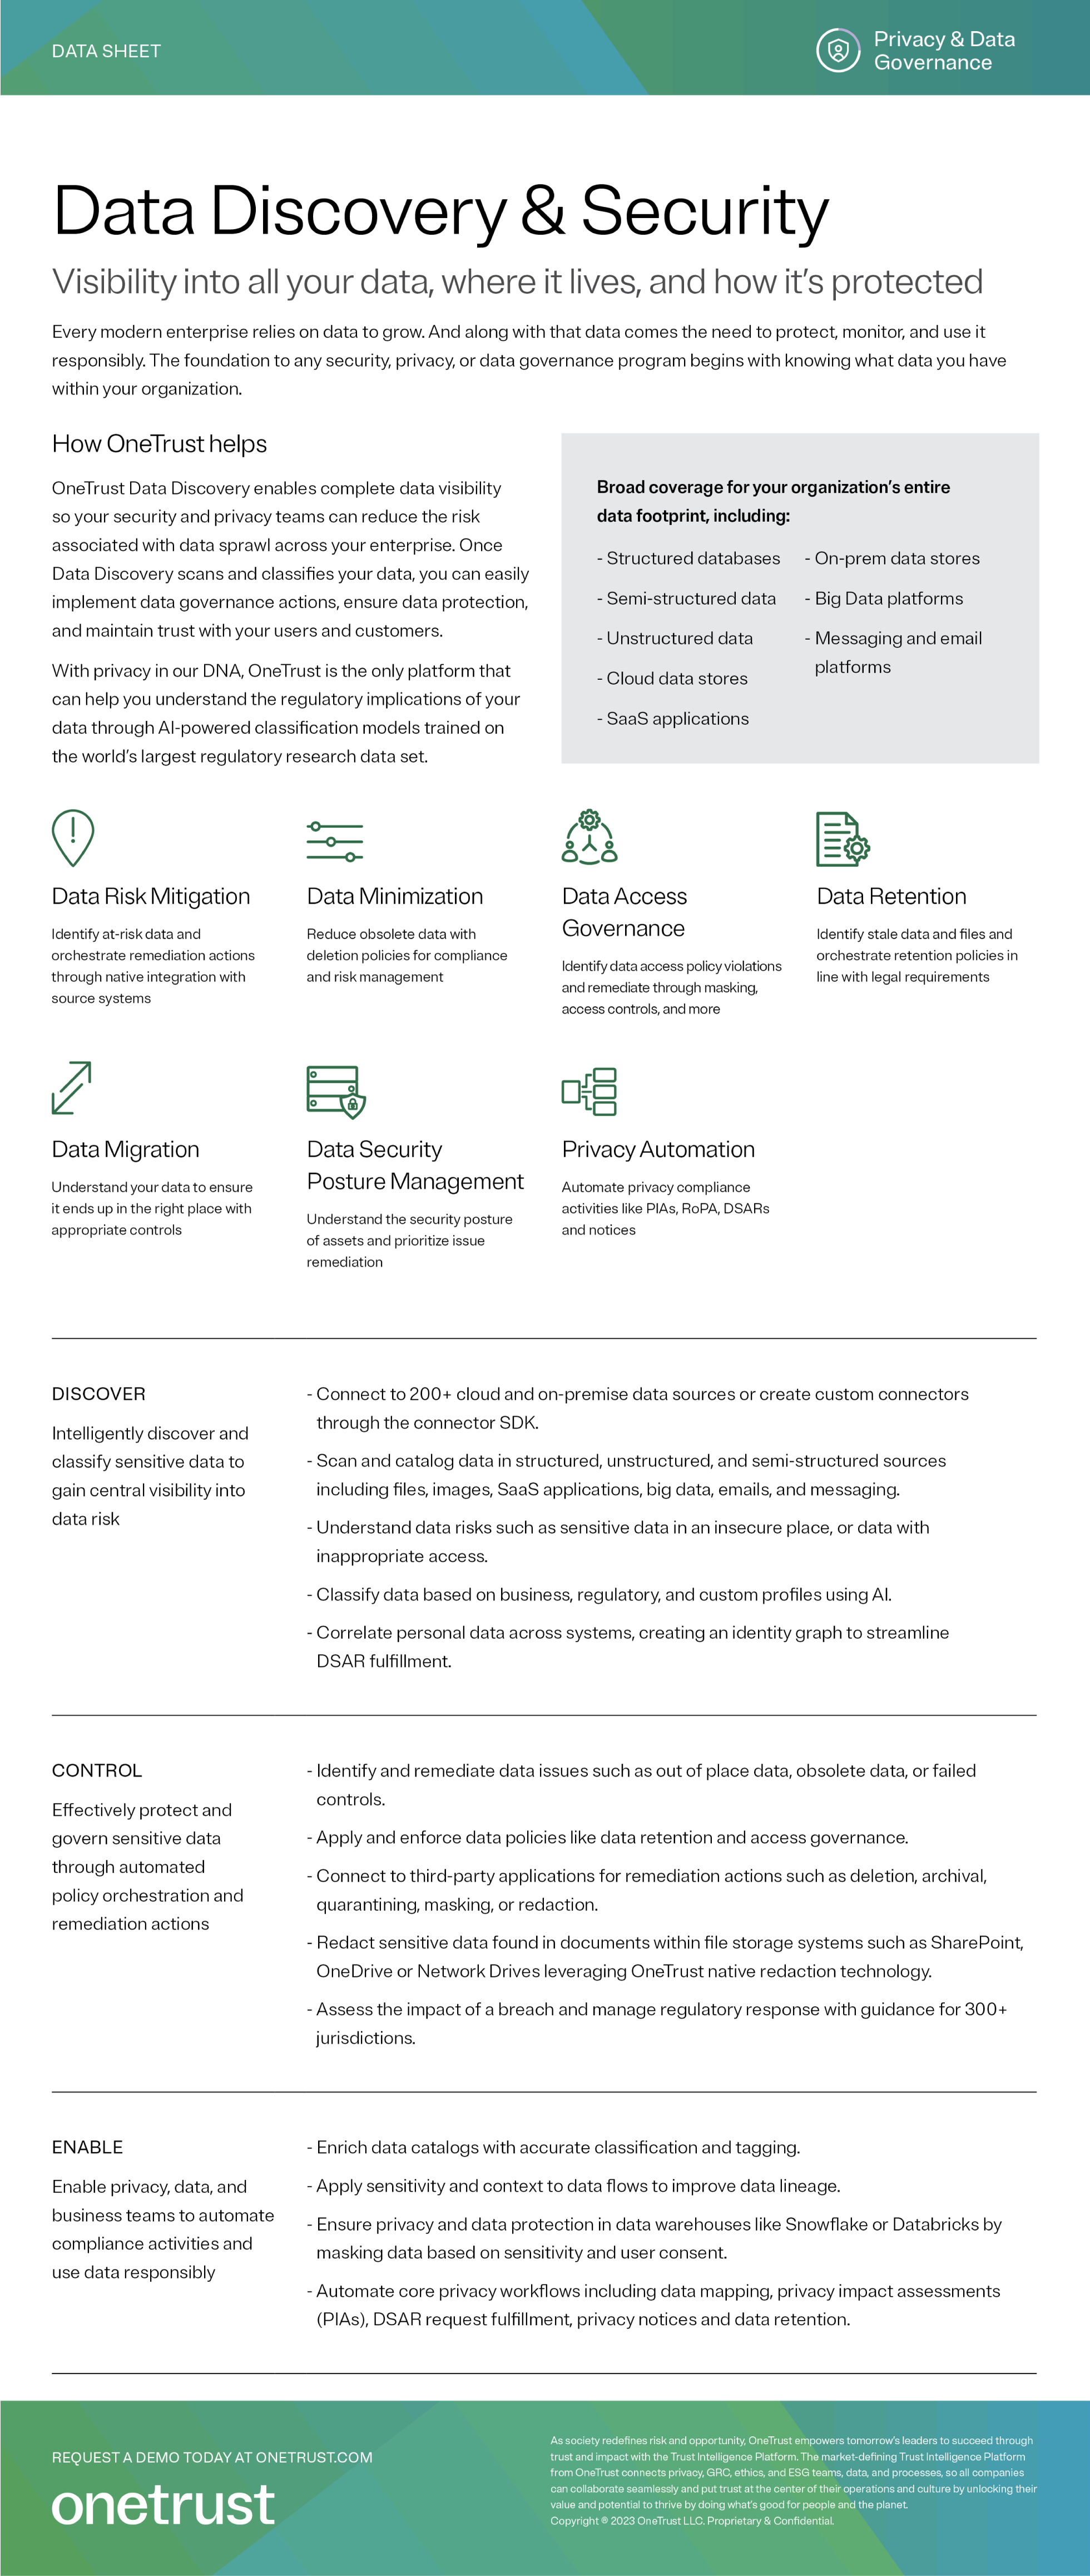 OneTrust Data Discovery and Security Data Sheet